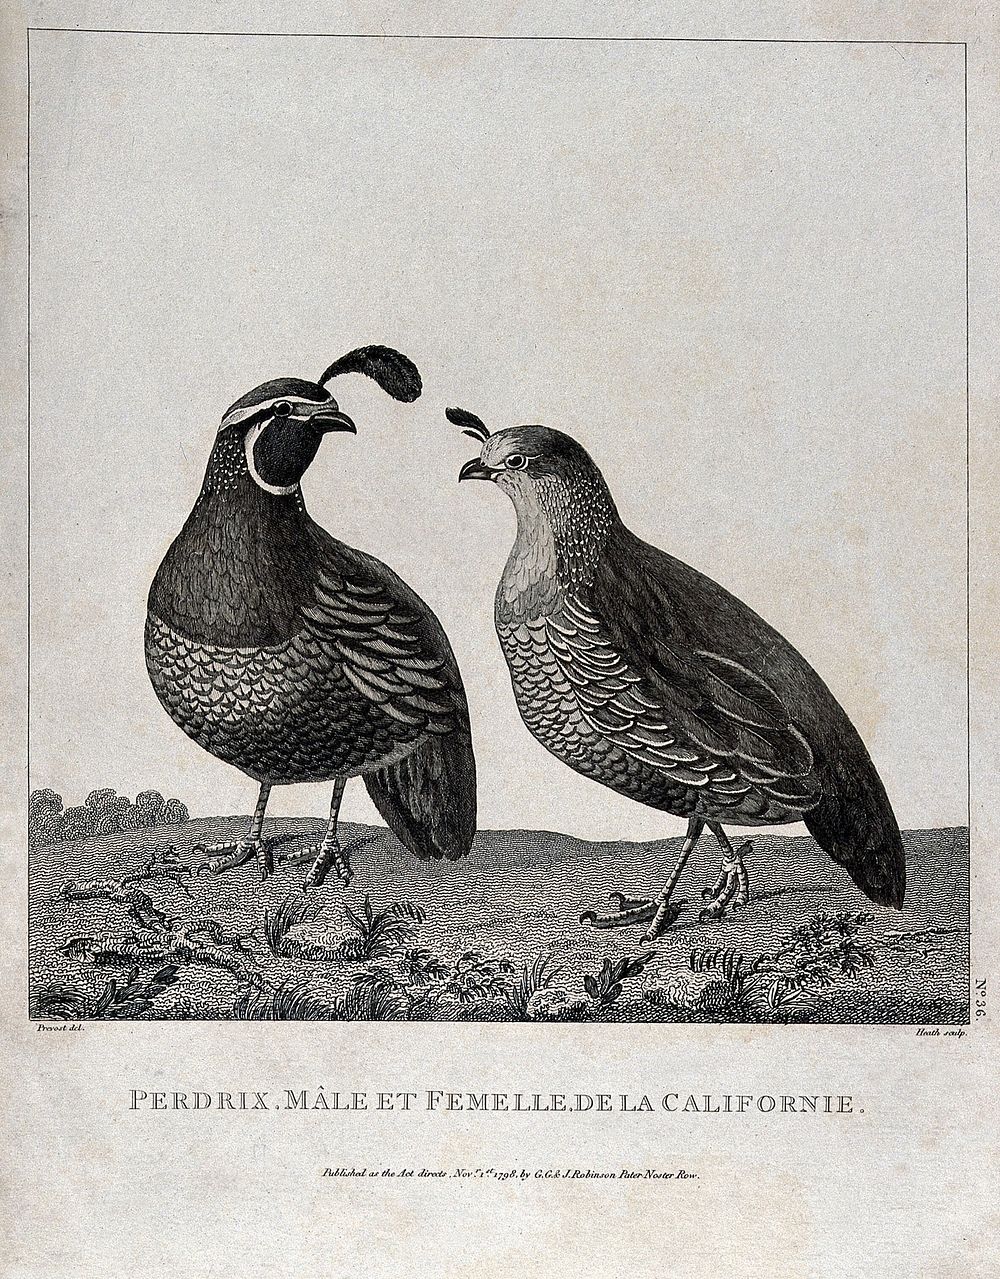 Valley quail (Lophortyx californica): male and female. Engraving with etching by J. Heath, ca. 1798, after J.R. Prevost.